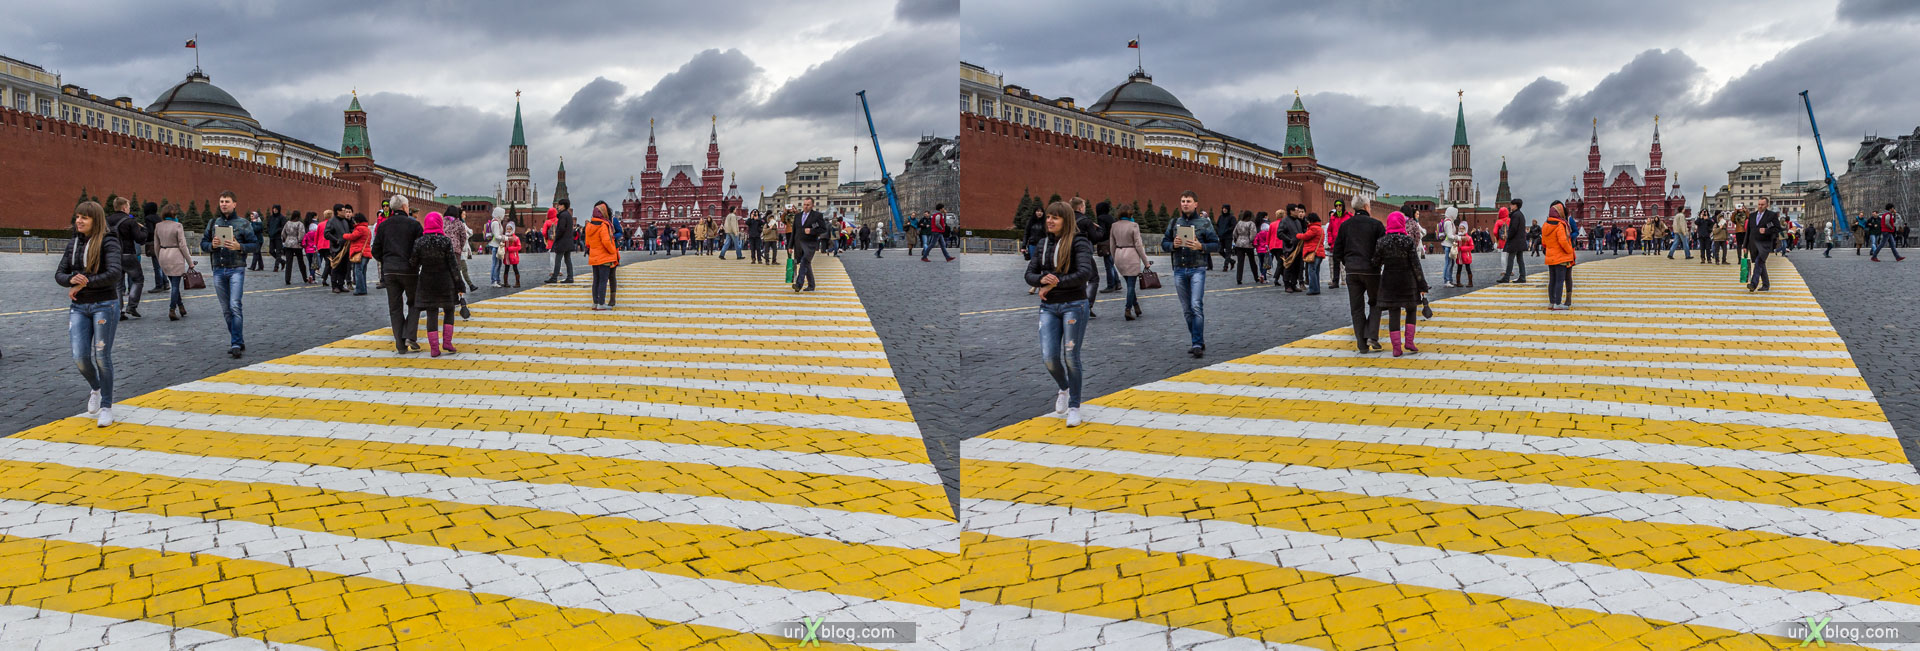 Red square, Moscow, Russia, 3D, stereo pair, cross-eyed, crossview, cross view stereo pair, stereoscopic, 2015